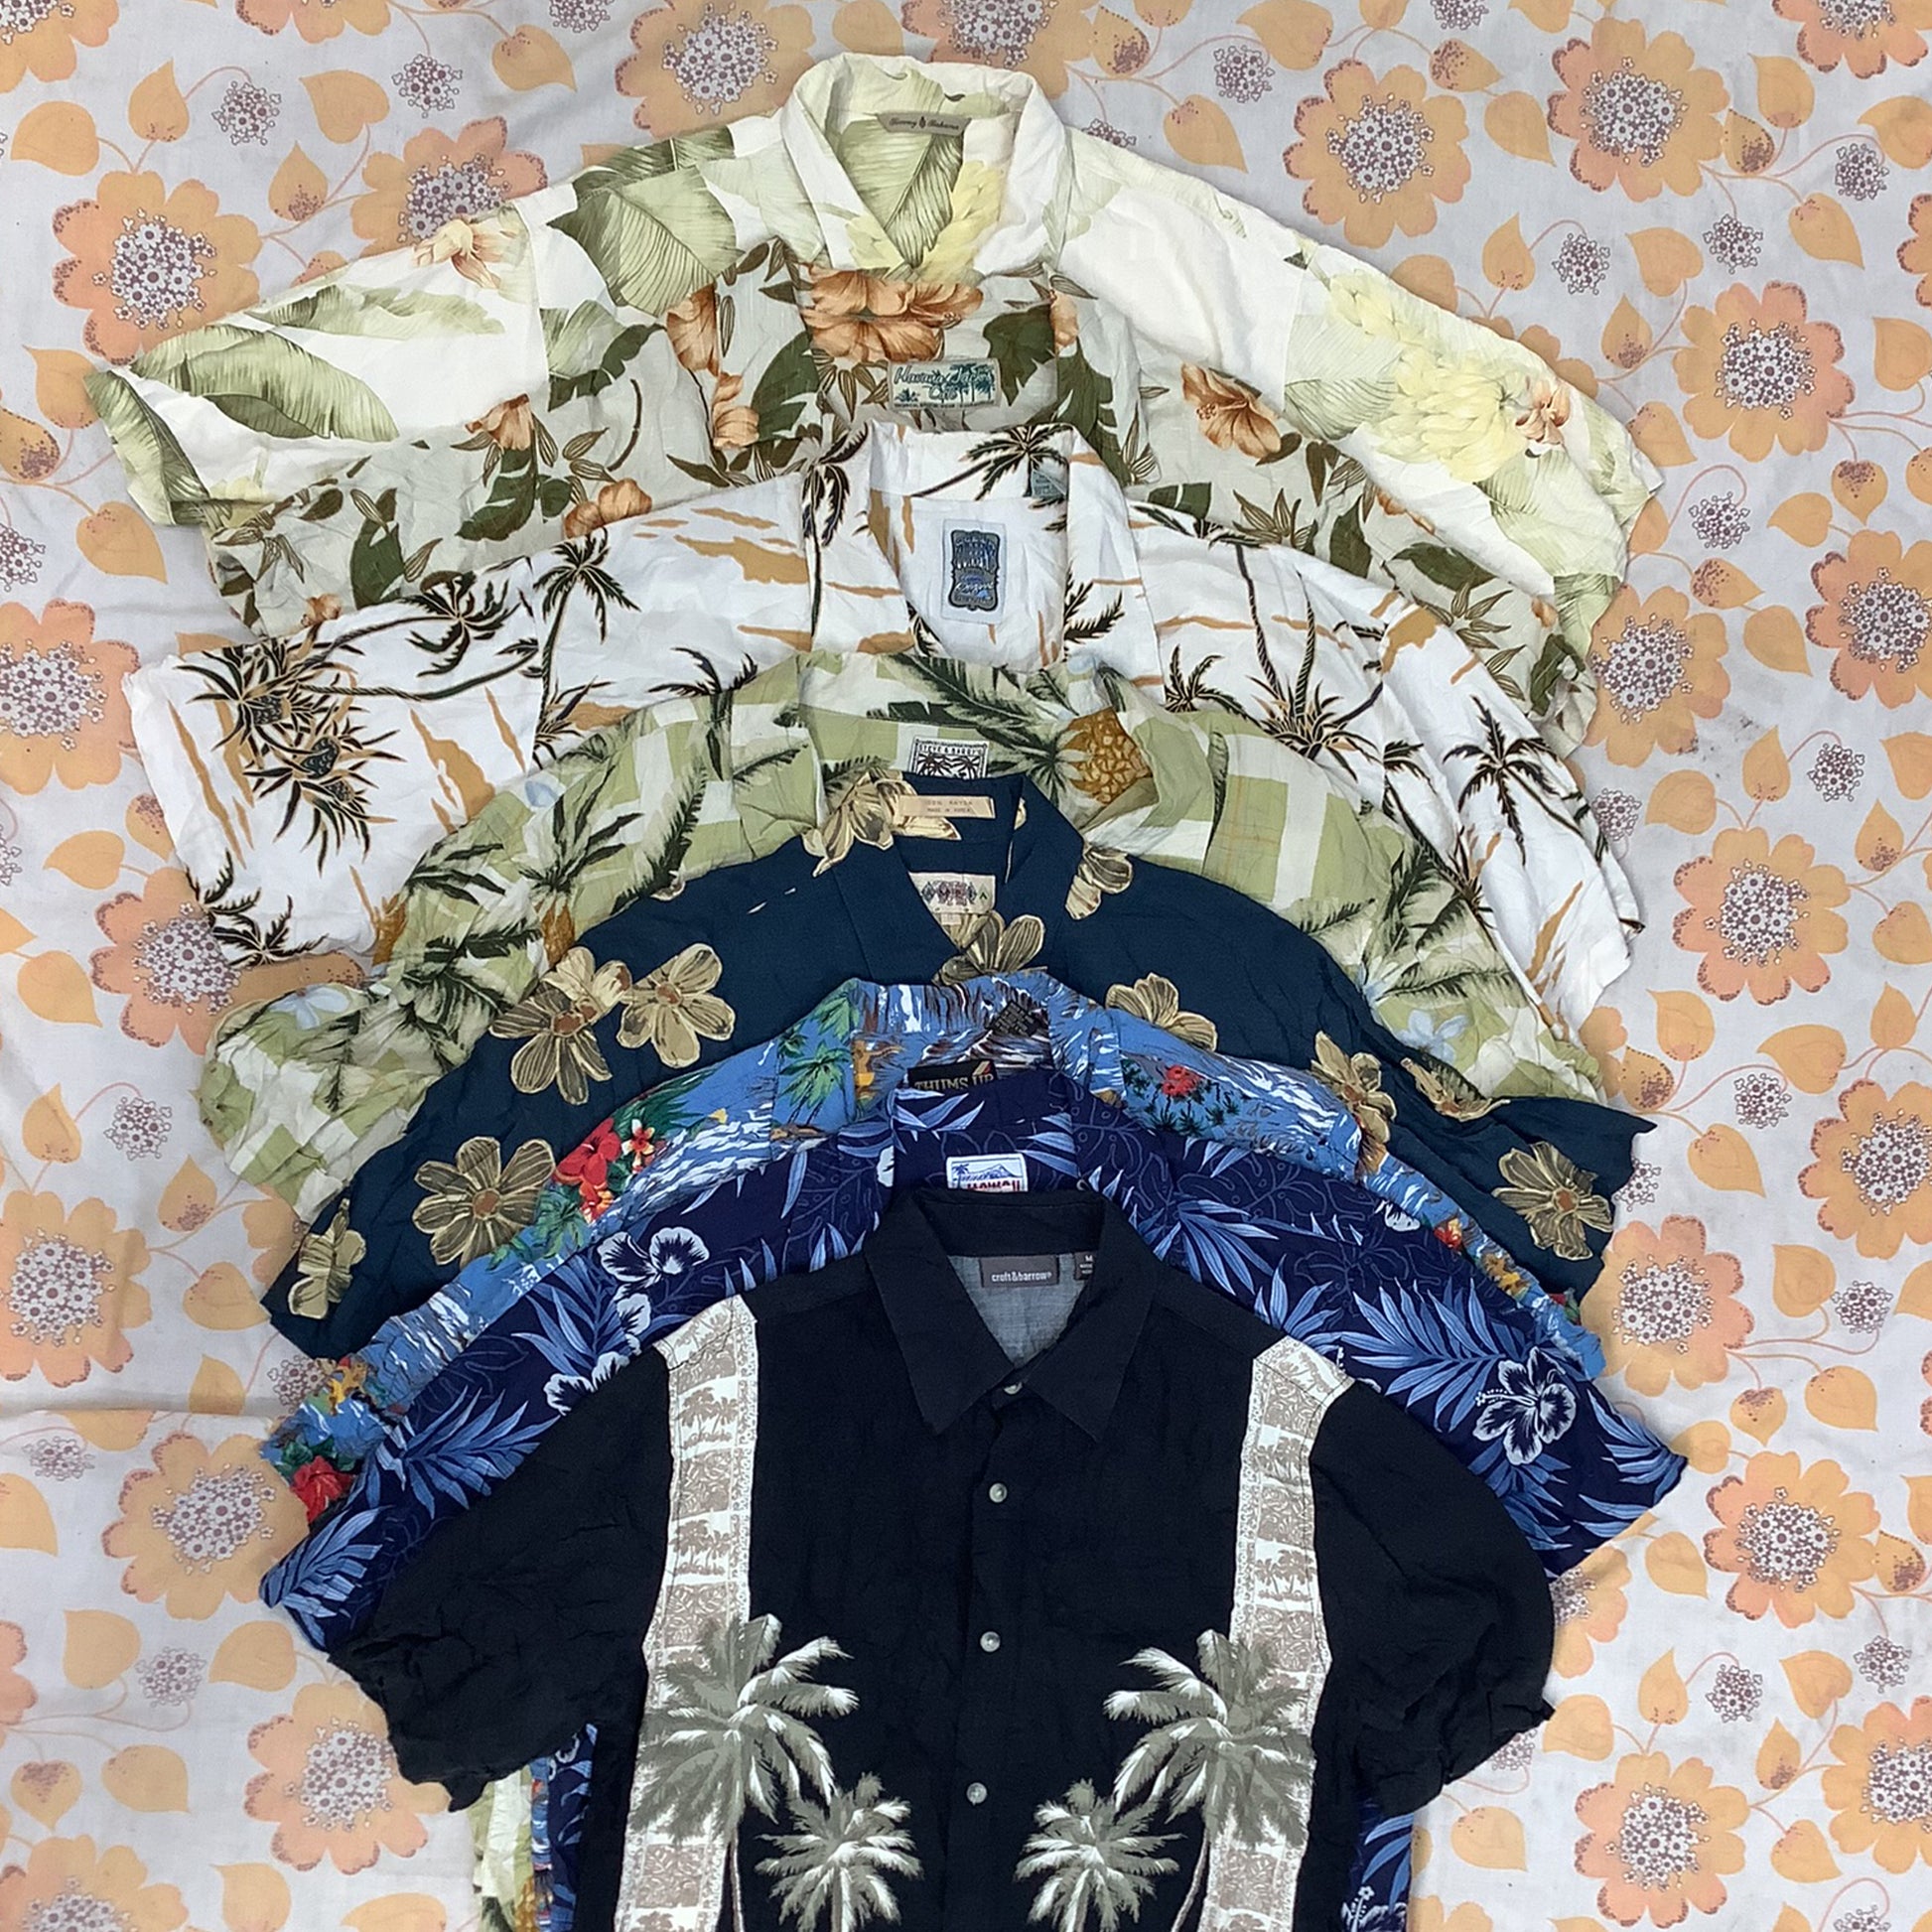 Wholesale vintage and secondhand mixed bundles of Hawaiian shirts. Choose from Grade A, B or ungraded to bulk buy per kilo, piece or bale. Handpick available in Sussex warehouse of Brighton's biggest vintage retailer or shop at kilo sale events.